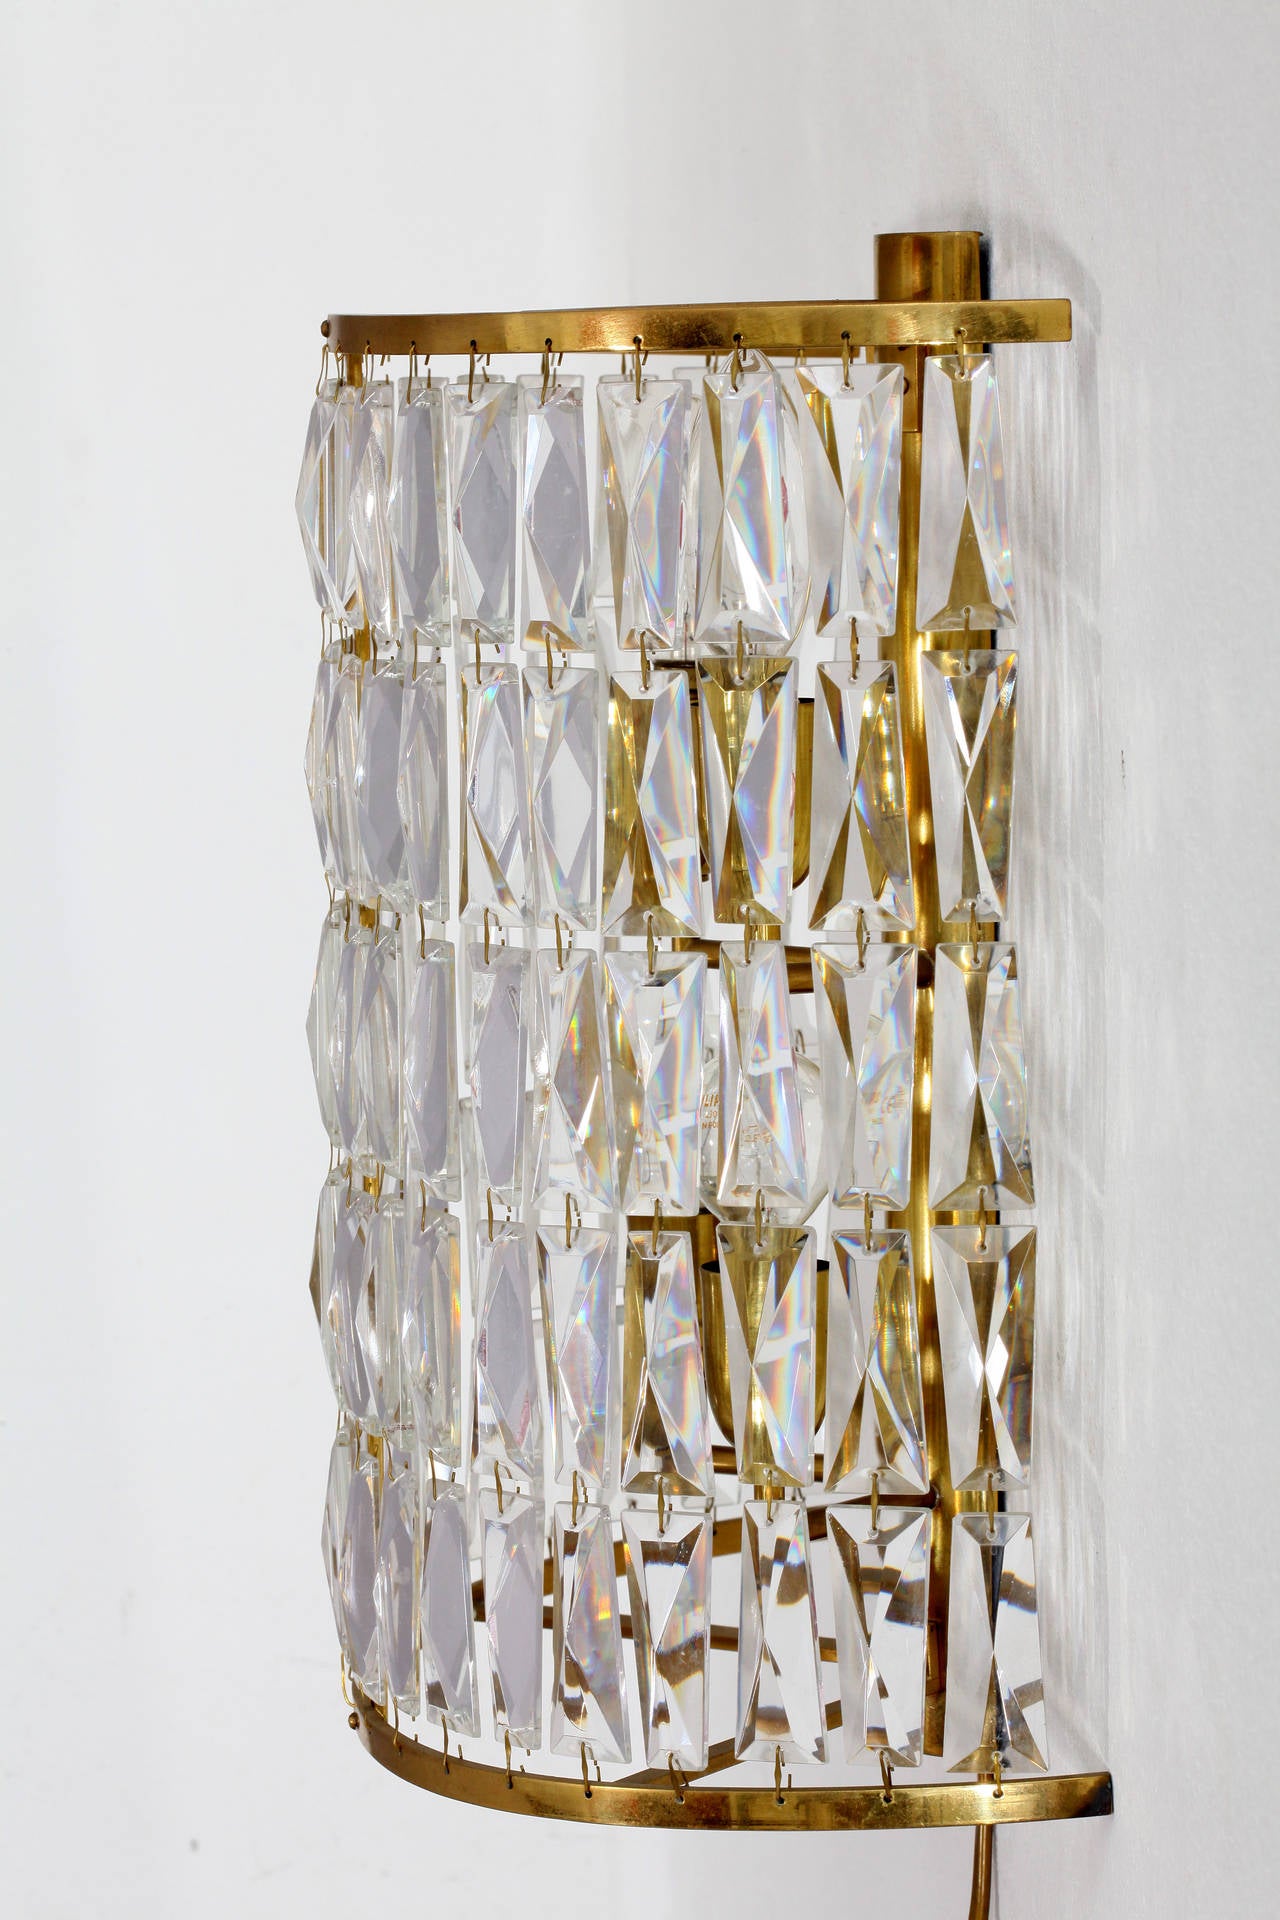 Pair of high quality Vienna crystal glass sconces,
attributed to Bakalowits & Sohne,
Vienna, 1950.
Hand-cut crystals in the form of rhombs.
Brass frame.
Measures: Height 15